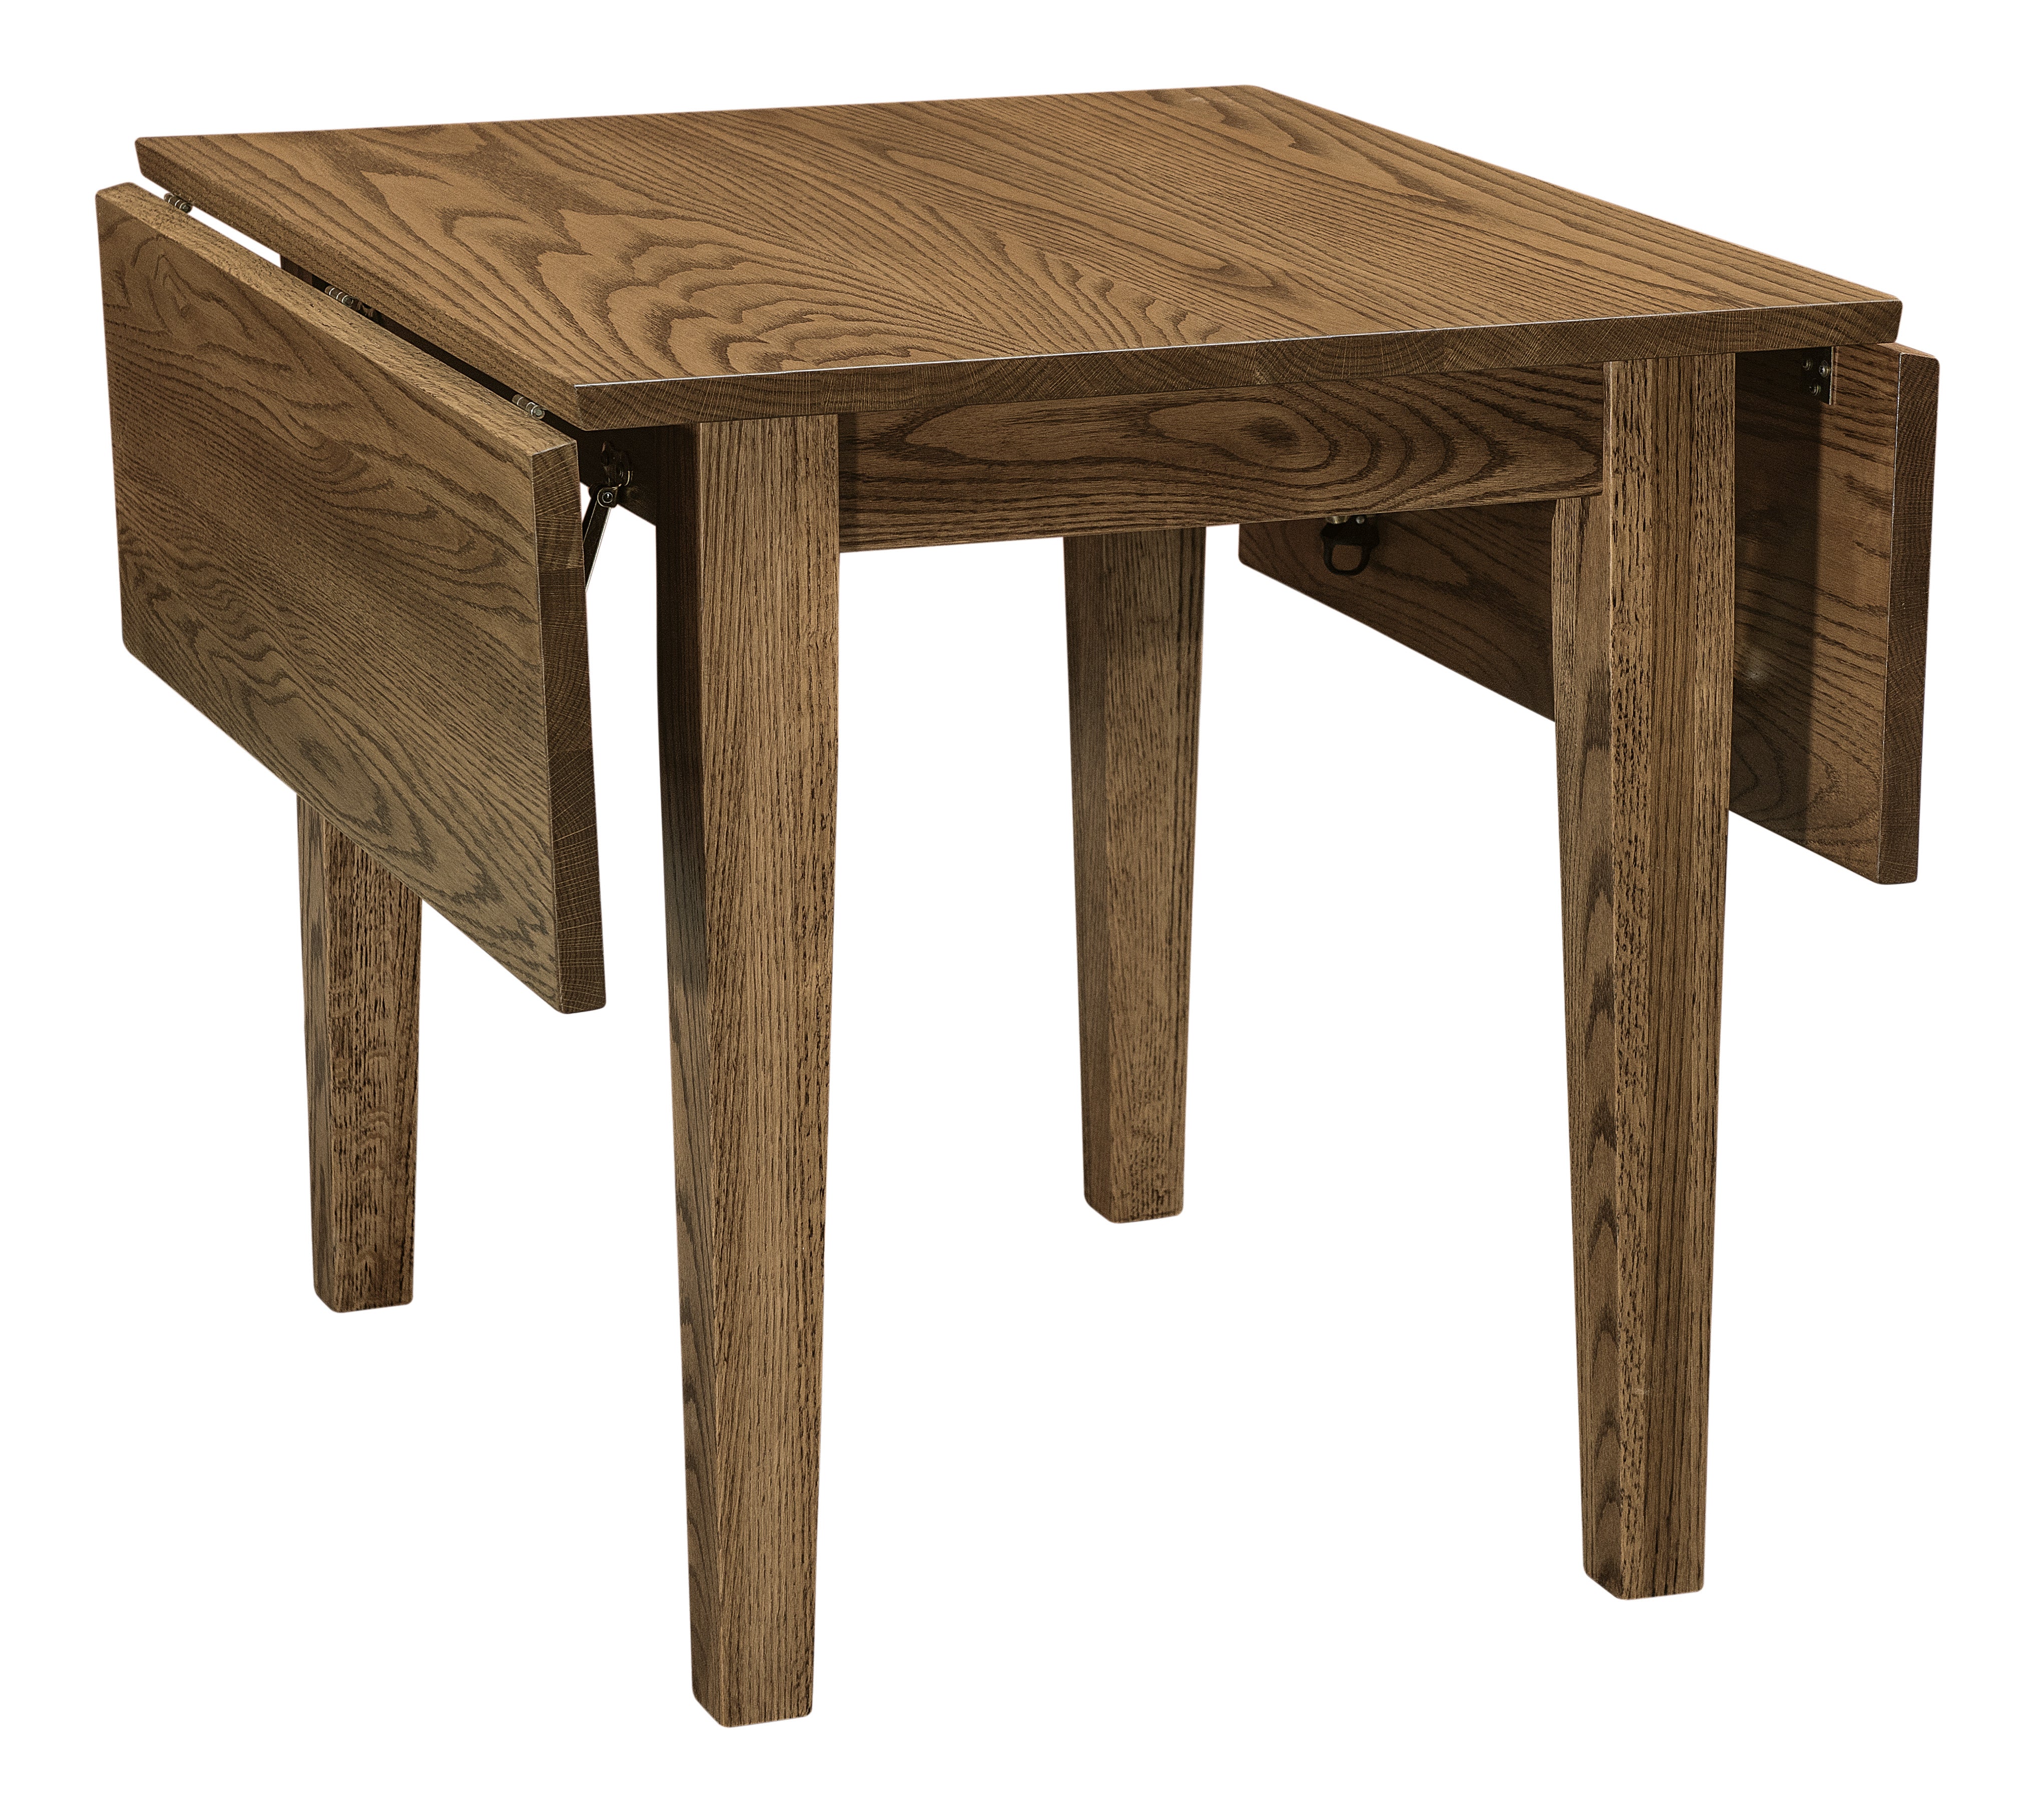 plymouth drop leaf leg table shown in red oak with almond stain 